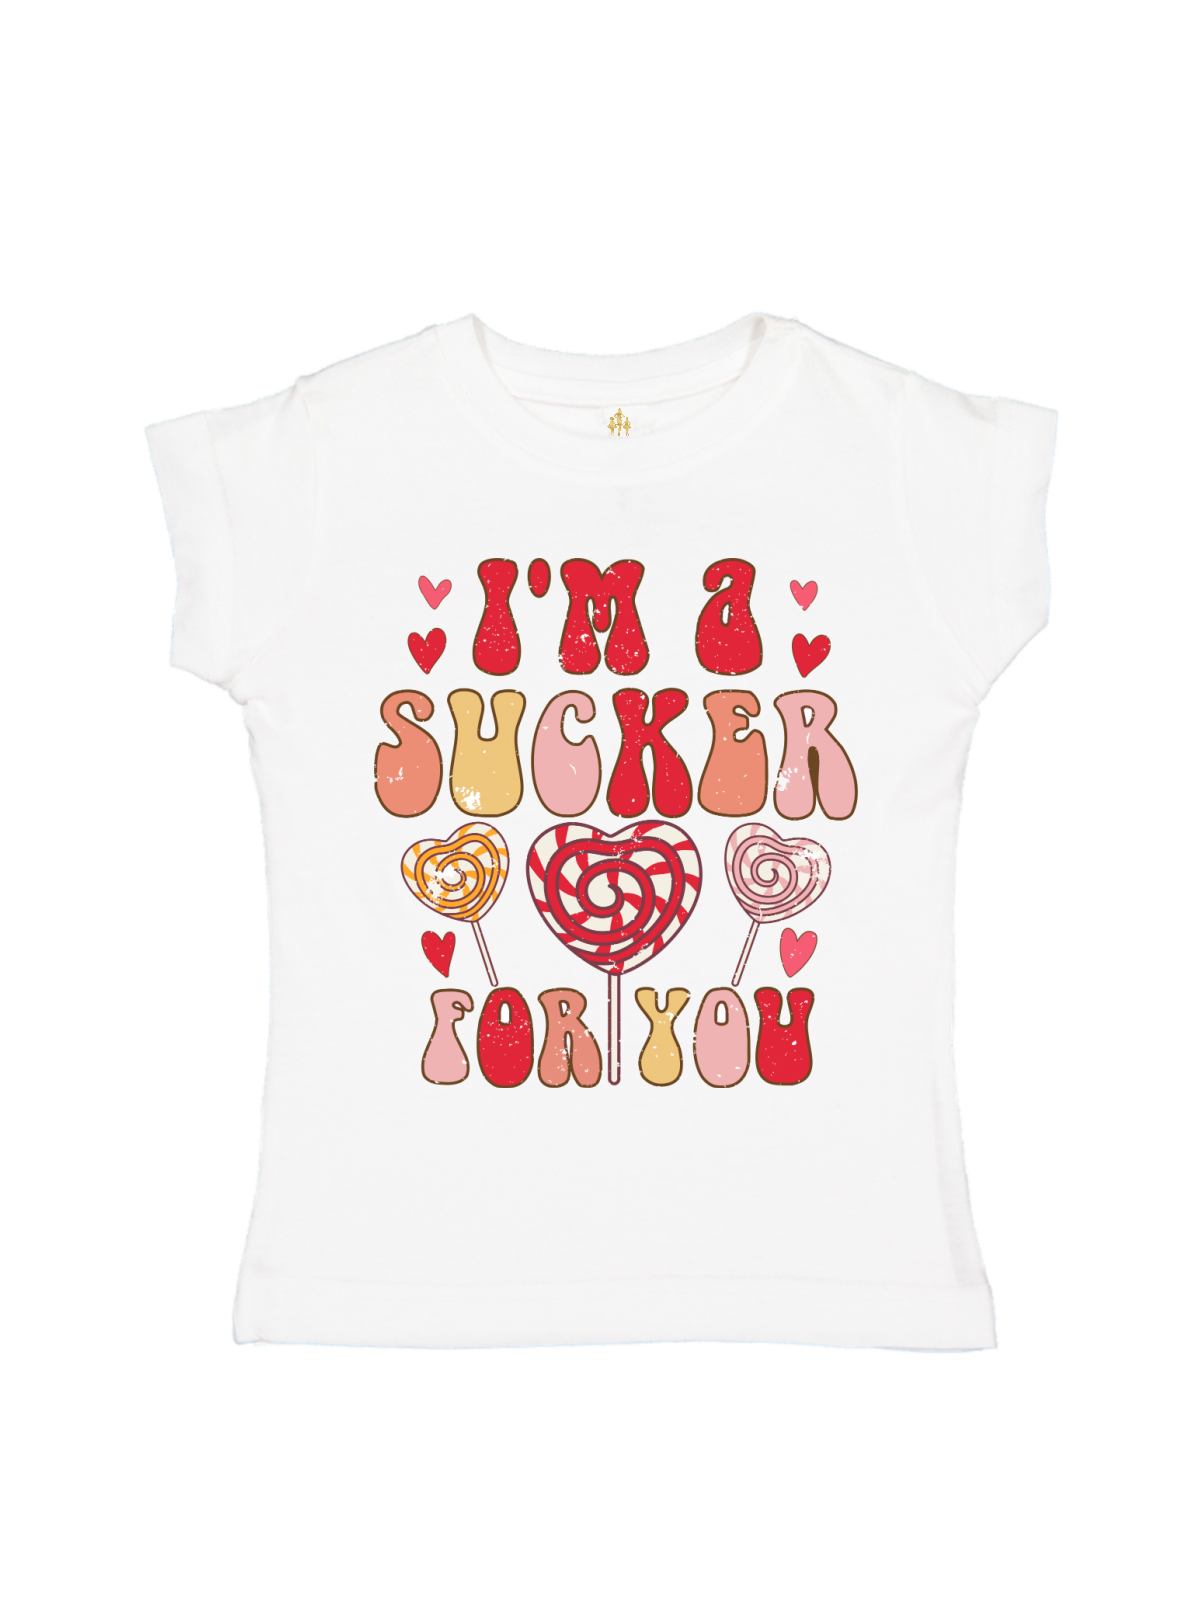 I'm a Sucker For You Cute Girls Valentine's Day Shirt